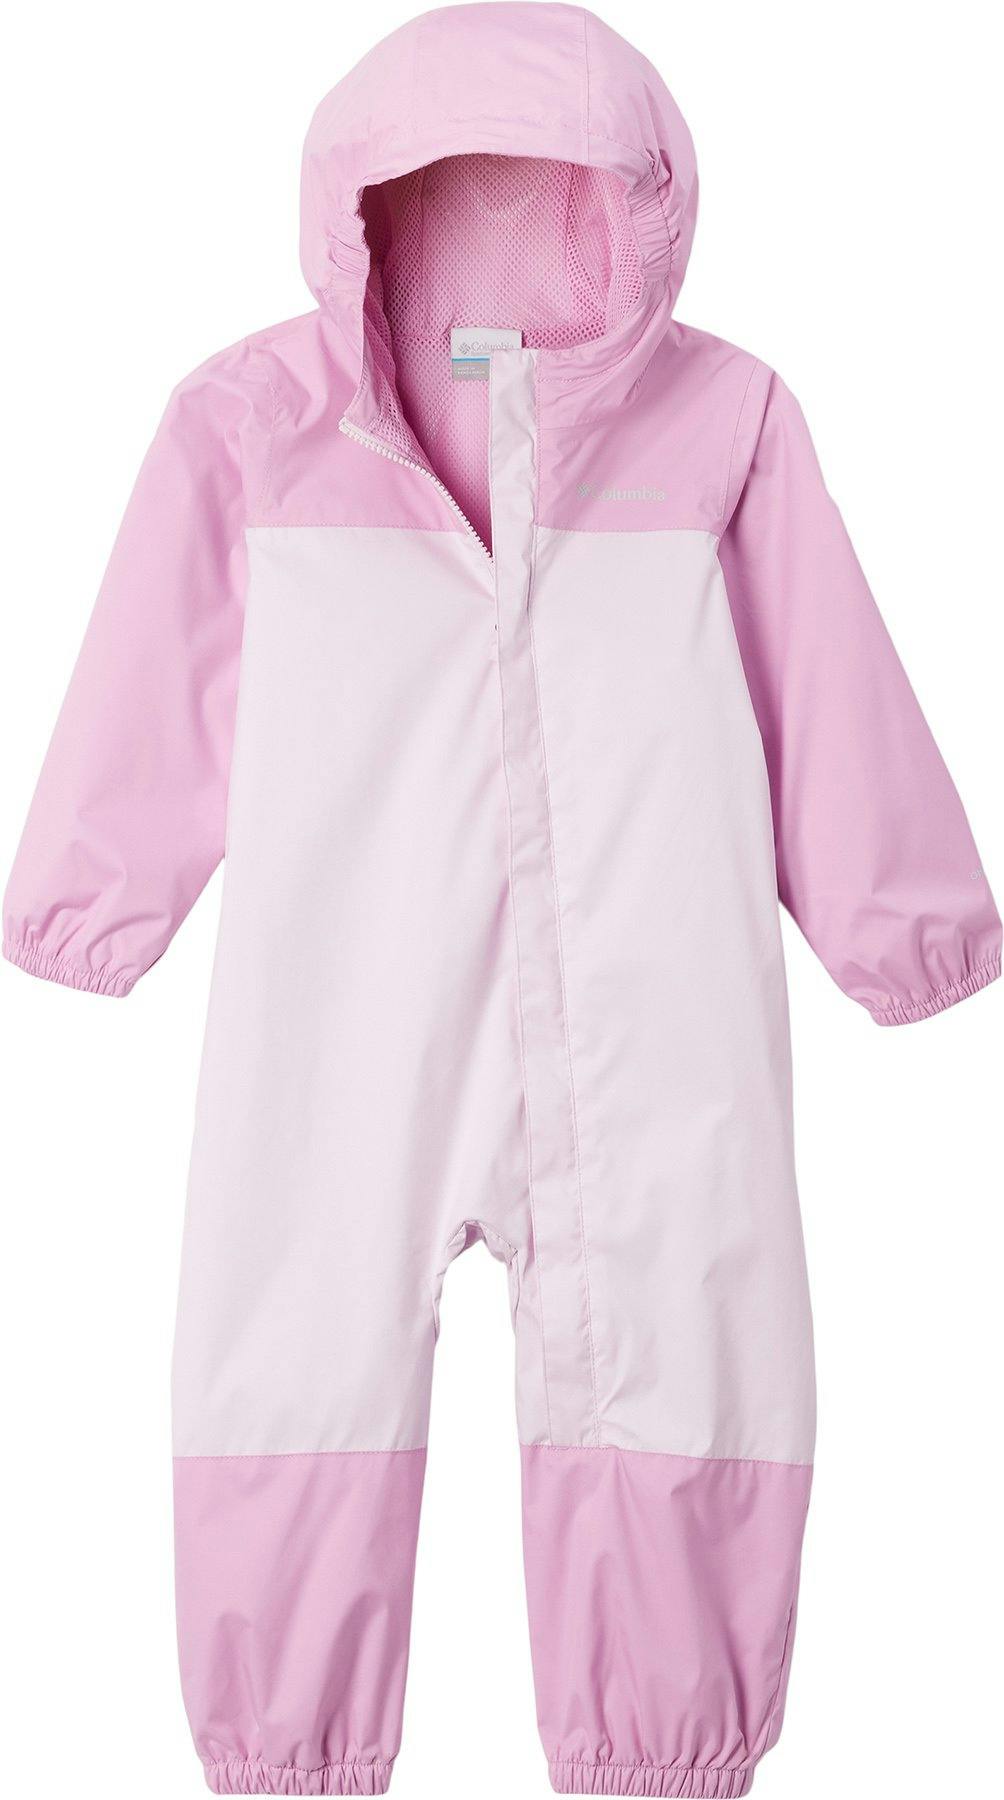 Product image for Critter Jumper Rain Suit - Toddlers